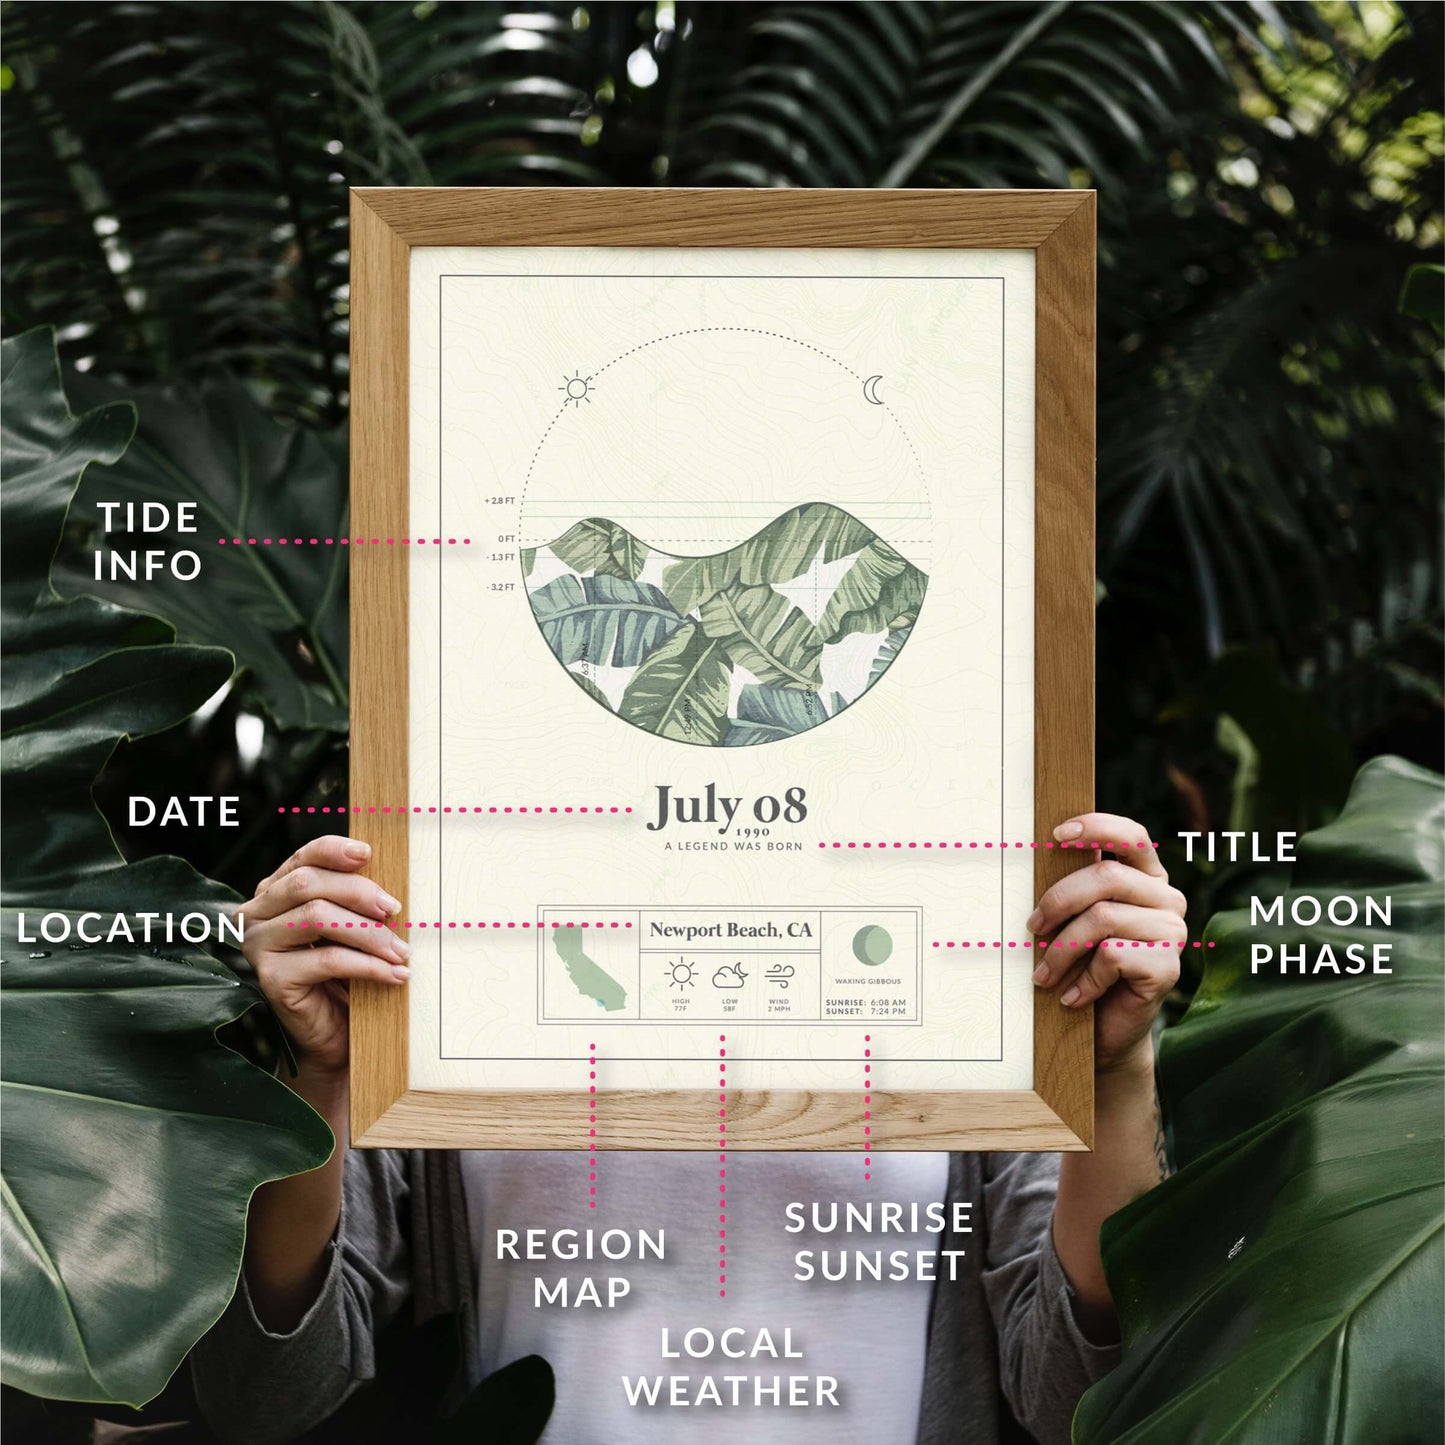 wooden framed picture of the personalized tide poster by salt atlas in the tropical print island green color held by a person in an outdoor setting. It displays the explanations of the details of the tide posters. These are custom posters showing the tide, weather, and moon phase for a special day, like an anniversary or birthday.